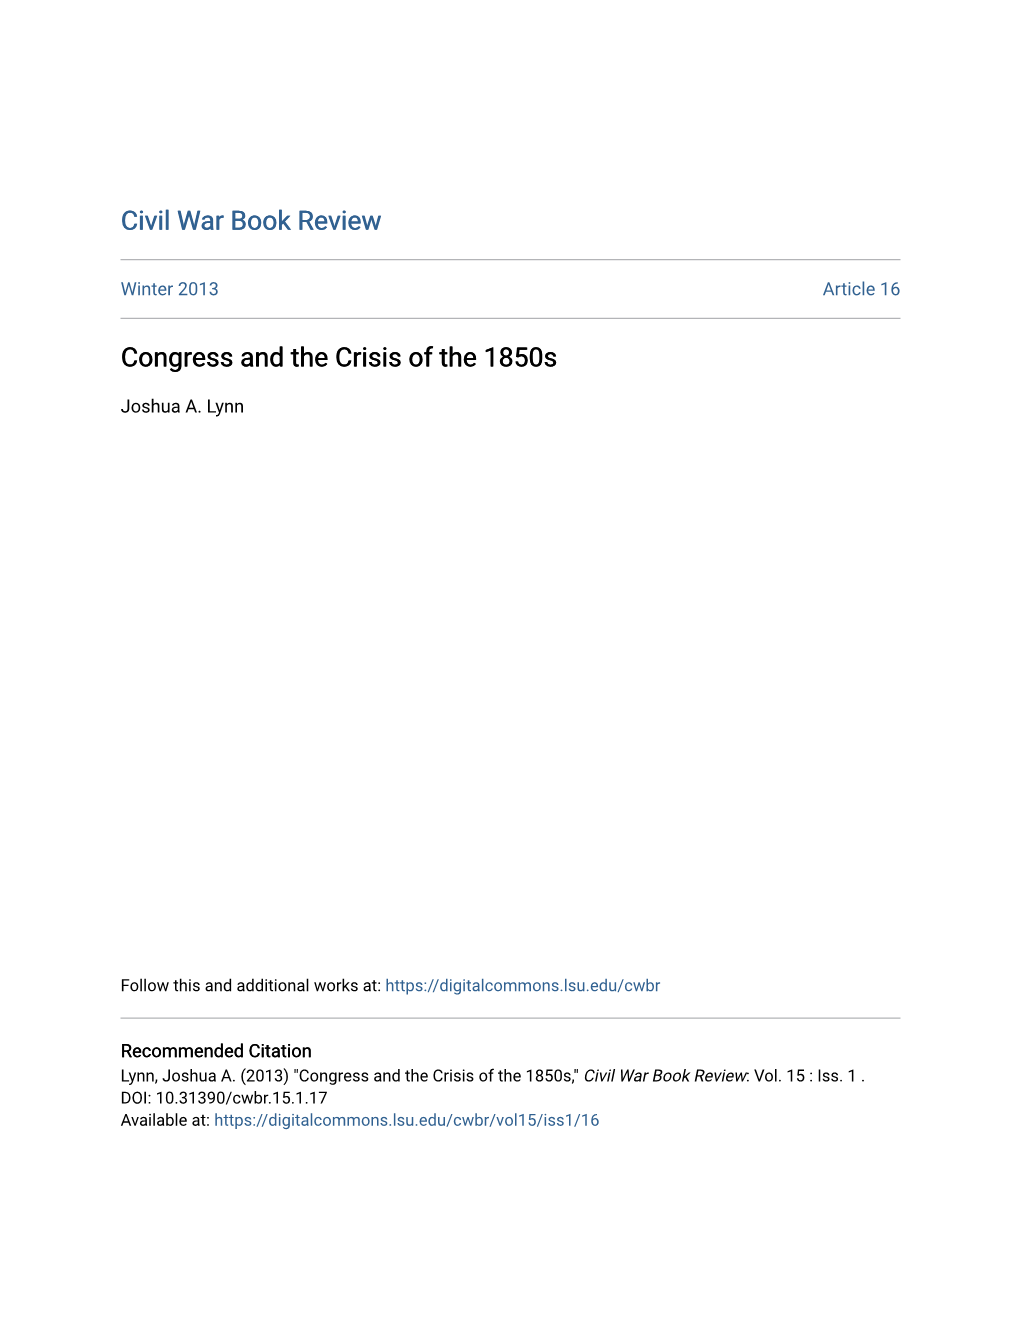 Congress and the Crisis of the 1850S